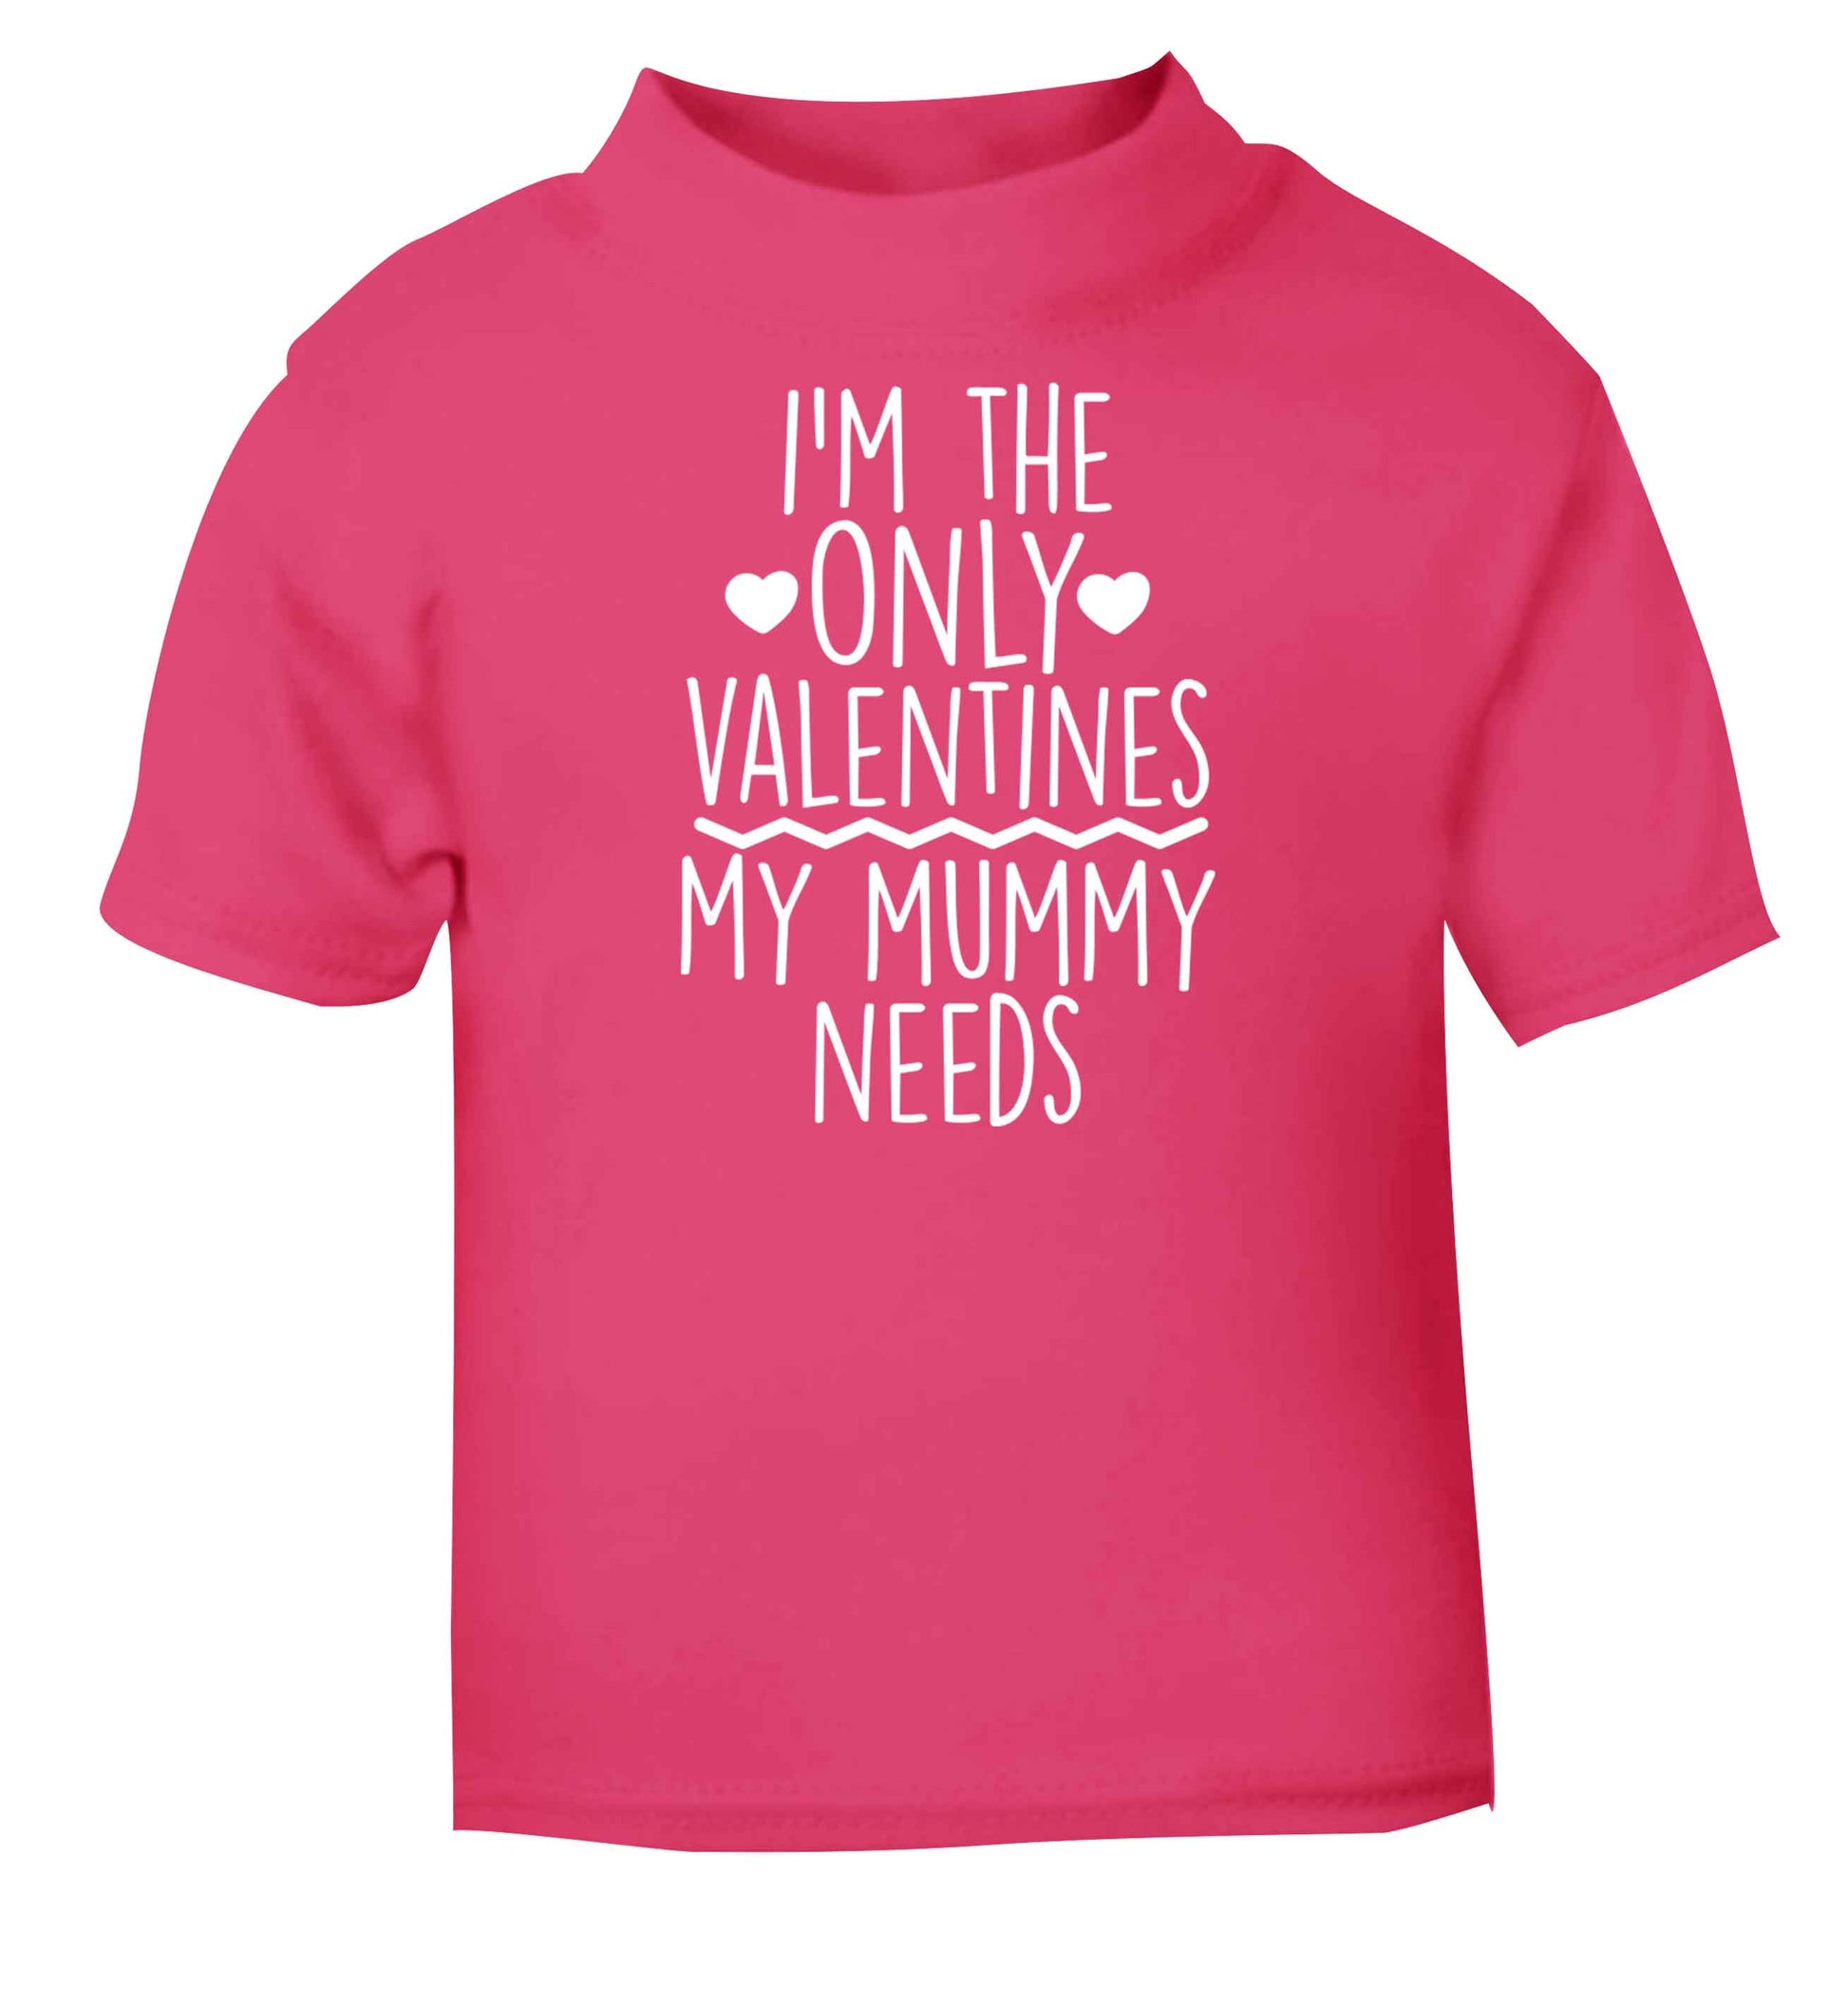 I'm the only valentines my mummy needs pink baby toddler Tshirt 2 Years